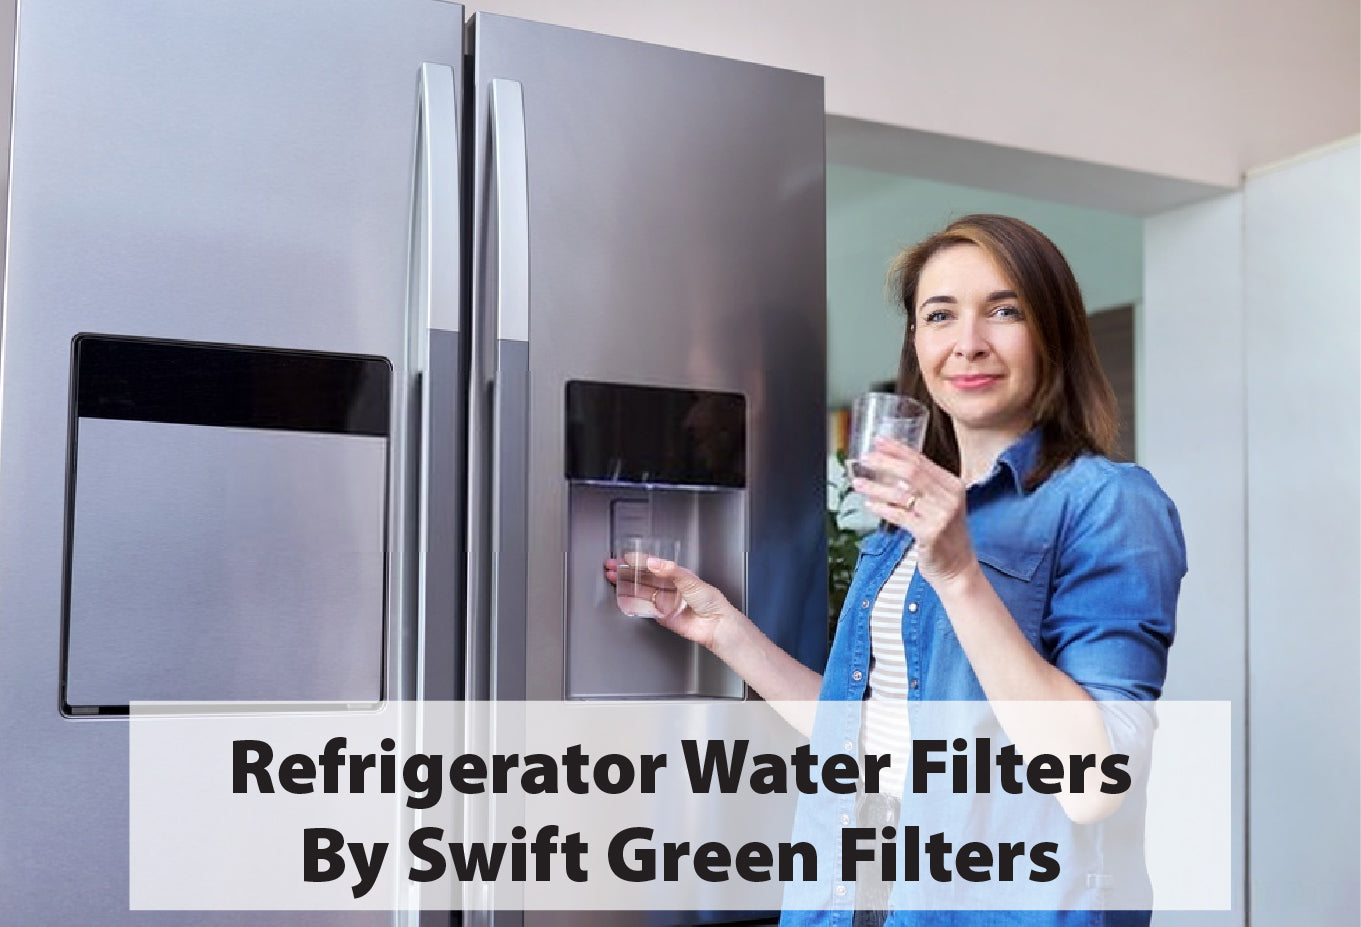 Refrigerator Water Filters By Swift Green Filters in the USA